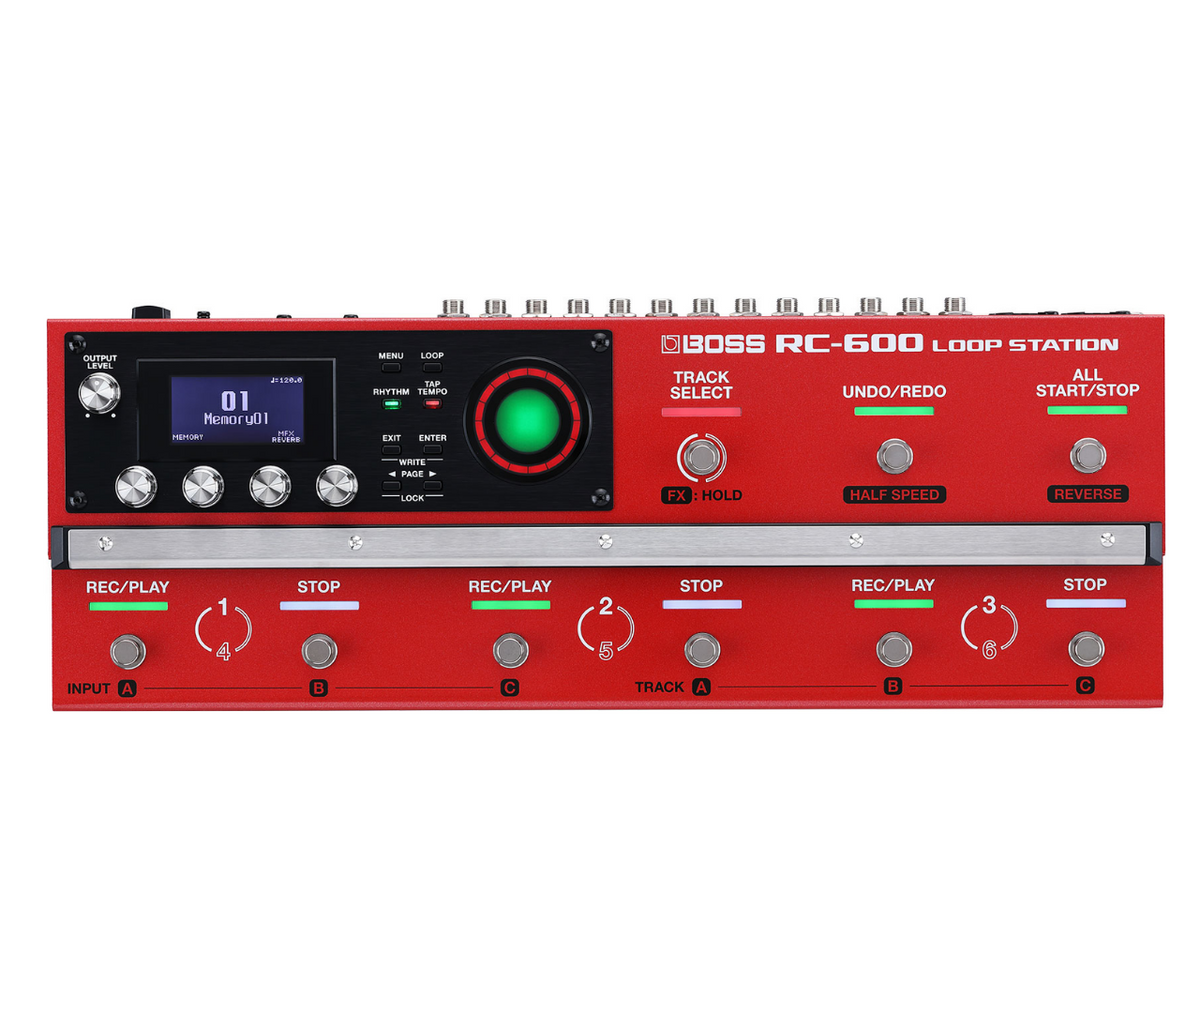 BOSS RC-600 Best Guitar Loop Station Ultra-flexible Onboard Control with 9 Assignable Footswitches and 3 Pedal Modes